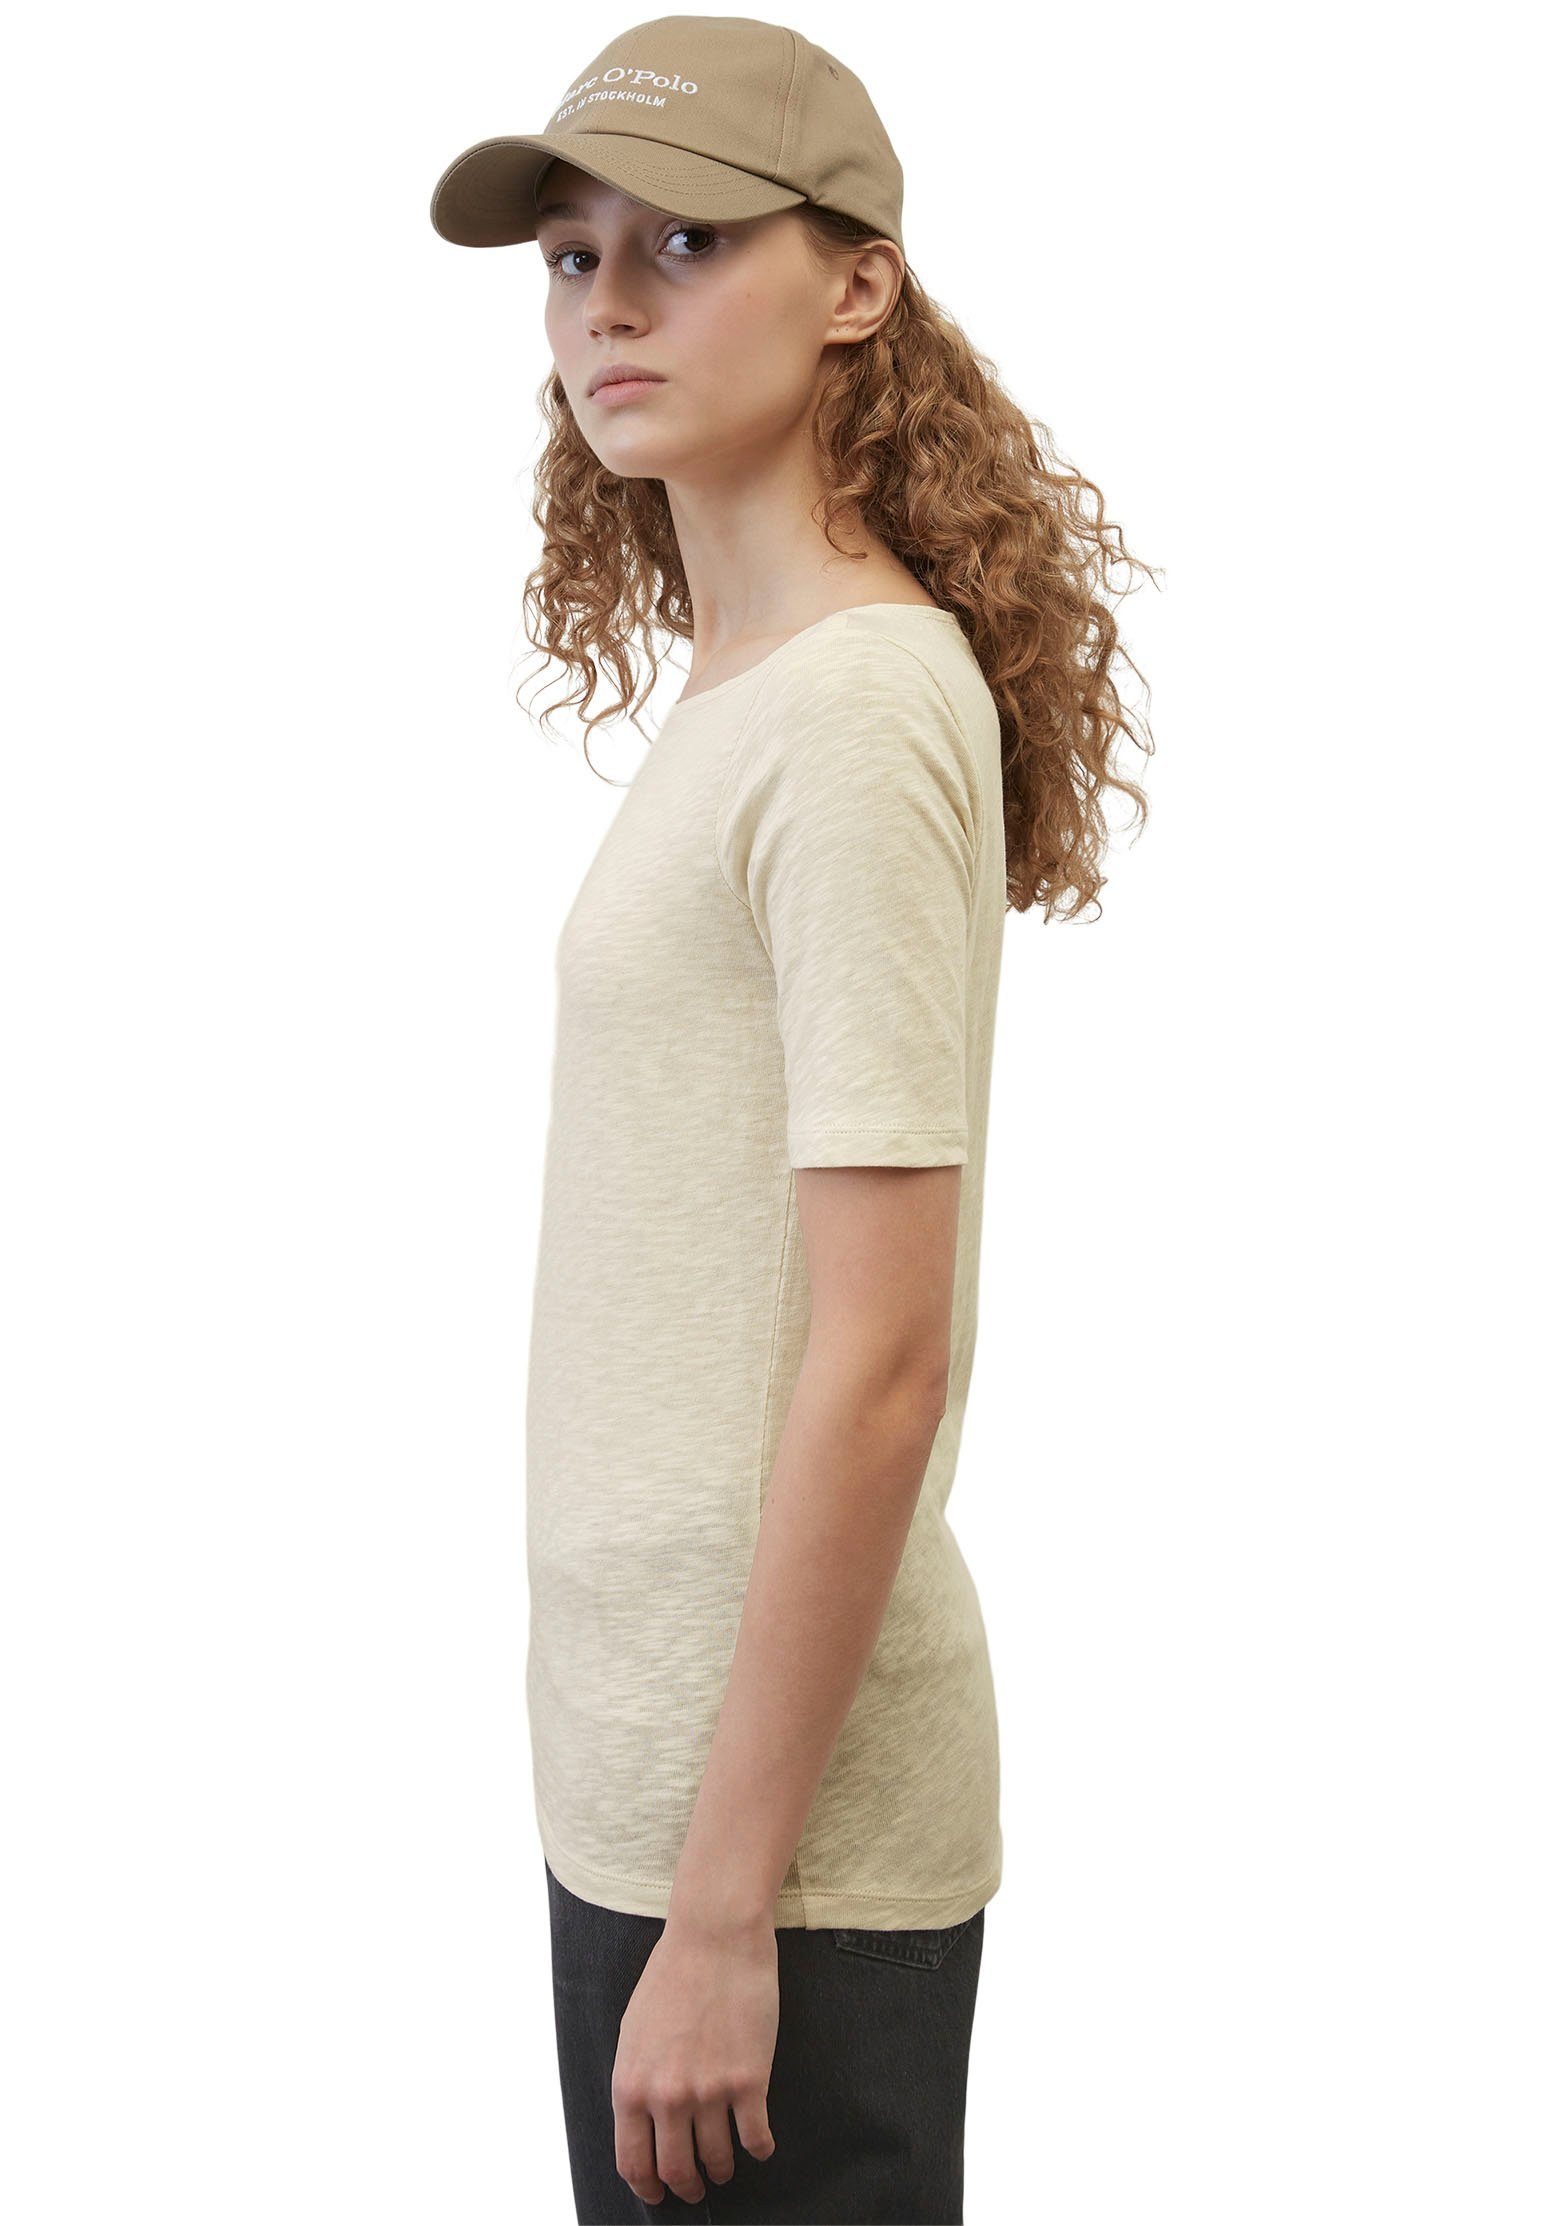 Marc O'Polo T-Shirt chalky sand